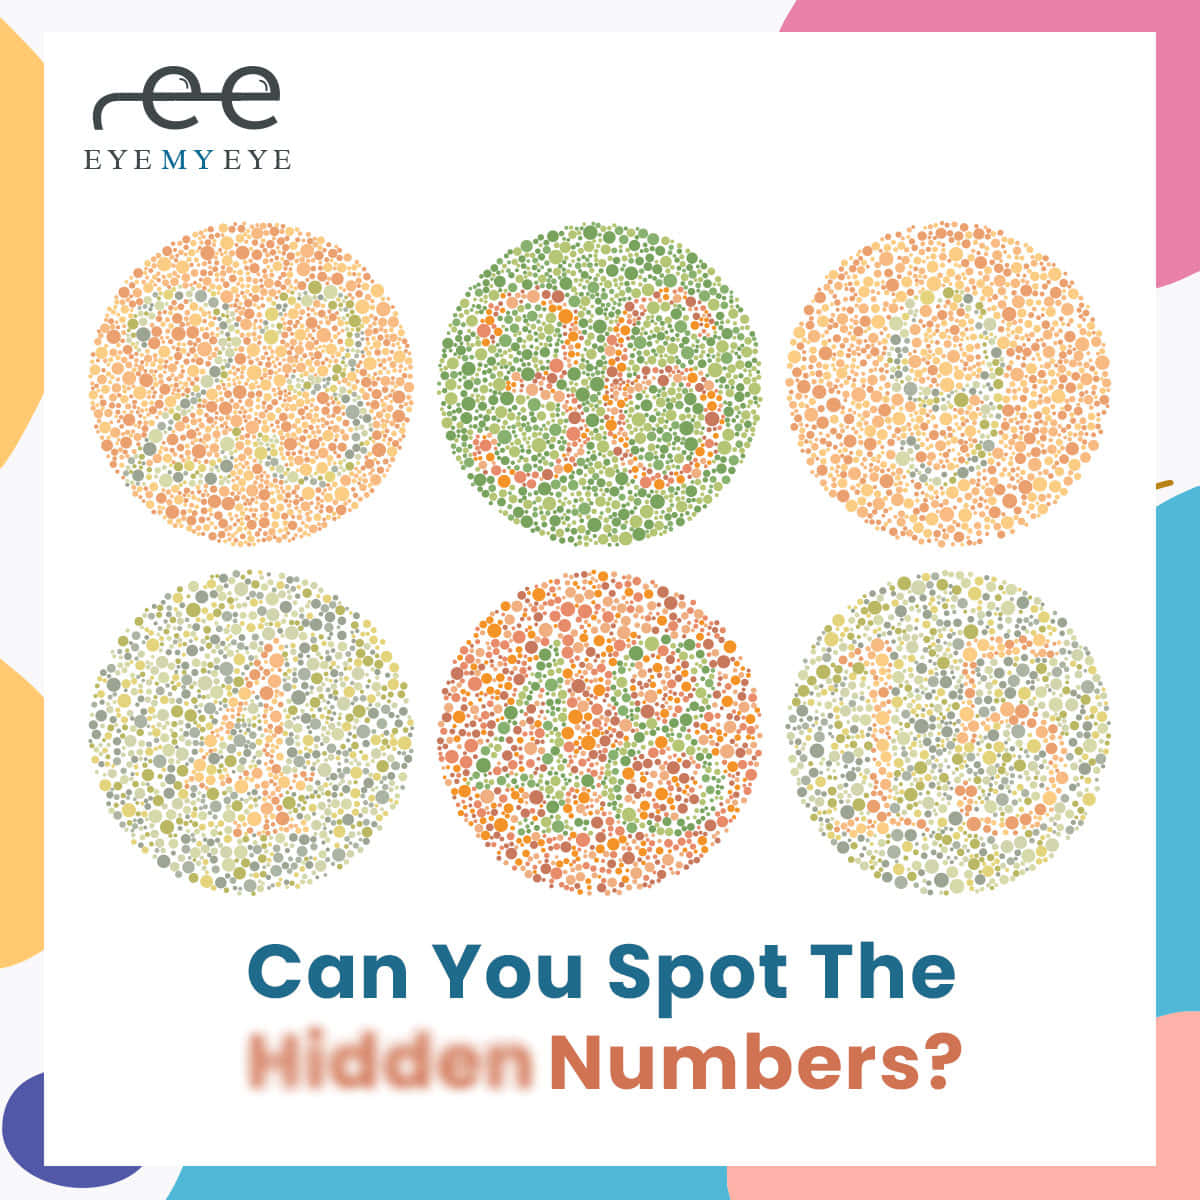 Can You Spot The Hidden Numbers?